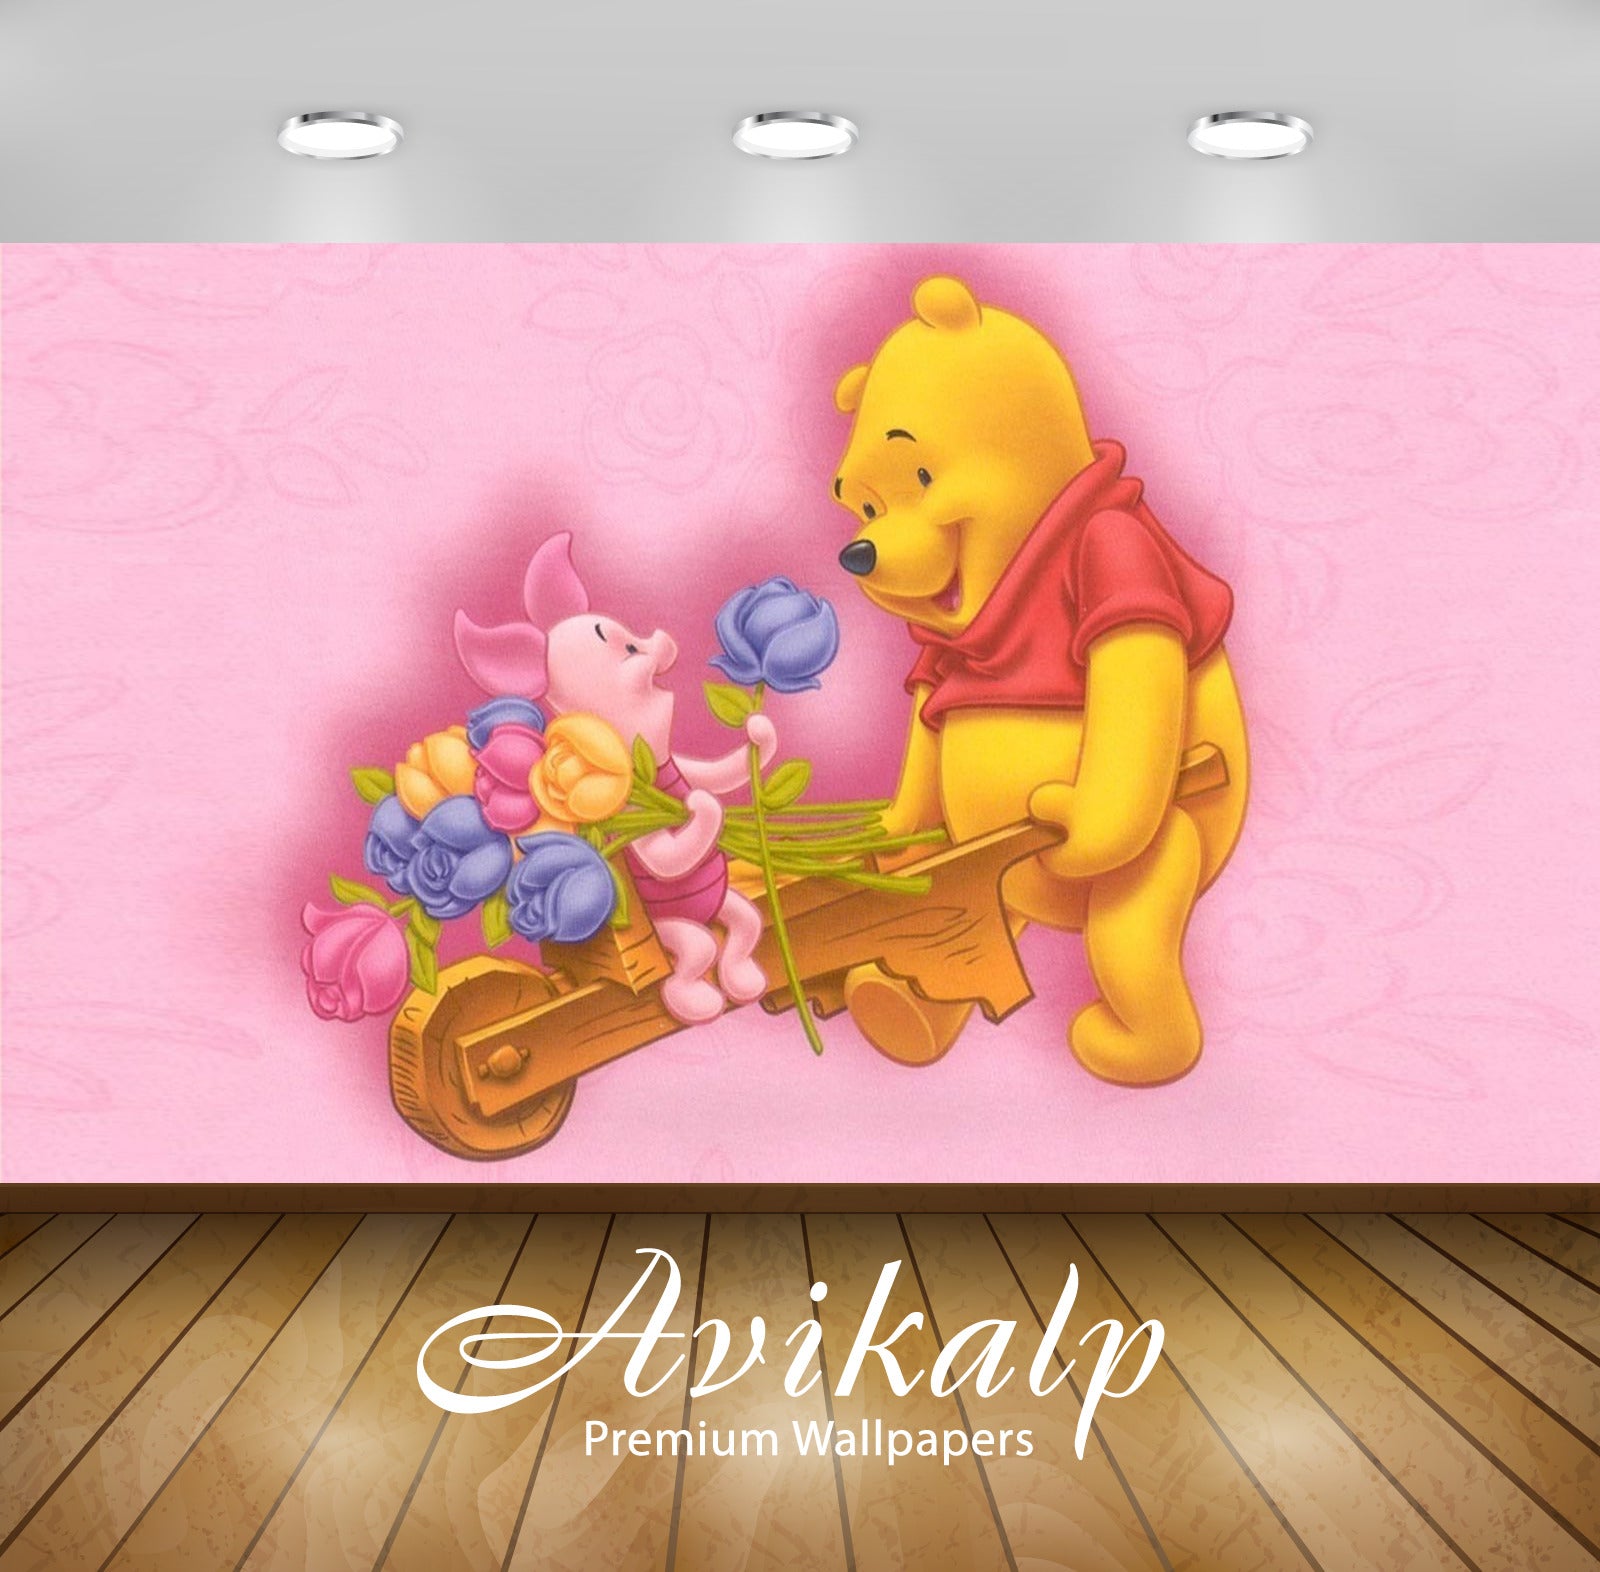 Avikalp Exclusive Awi2321 Winnie the Pooh and Piglet trolley bouquet of flowers Disney Full HD Wallp